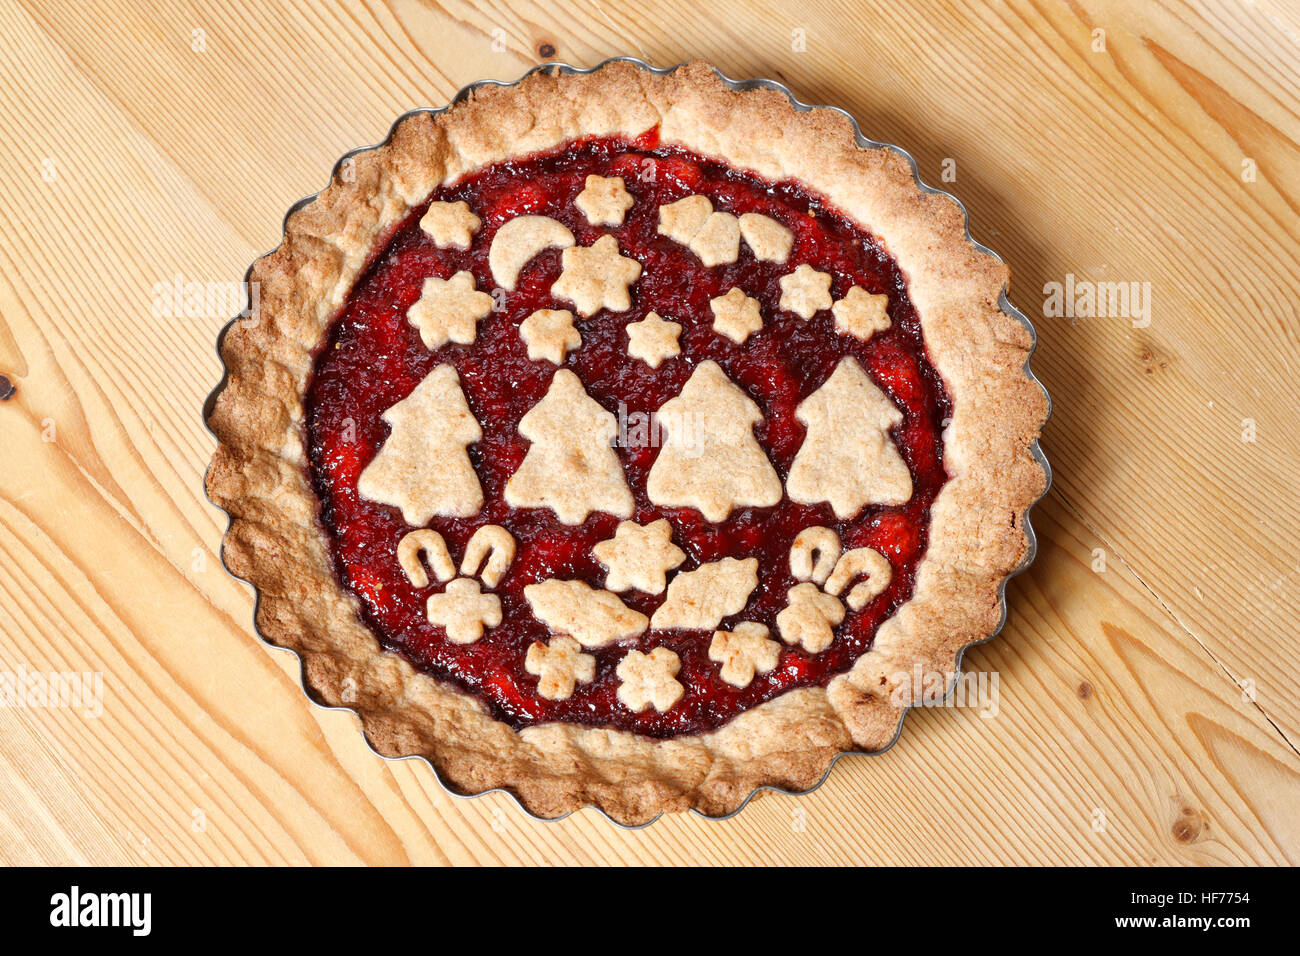 Decorated Linzer torte on wooden board Stock Photo